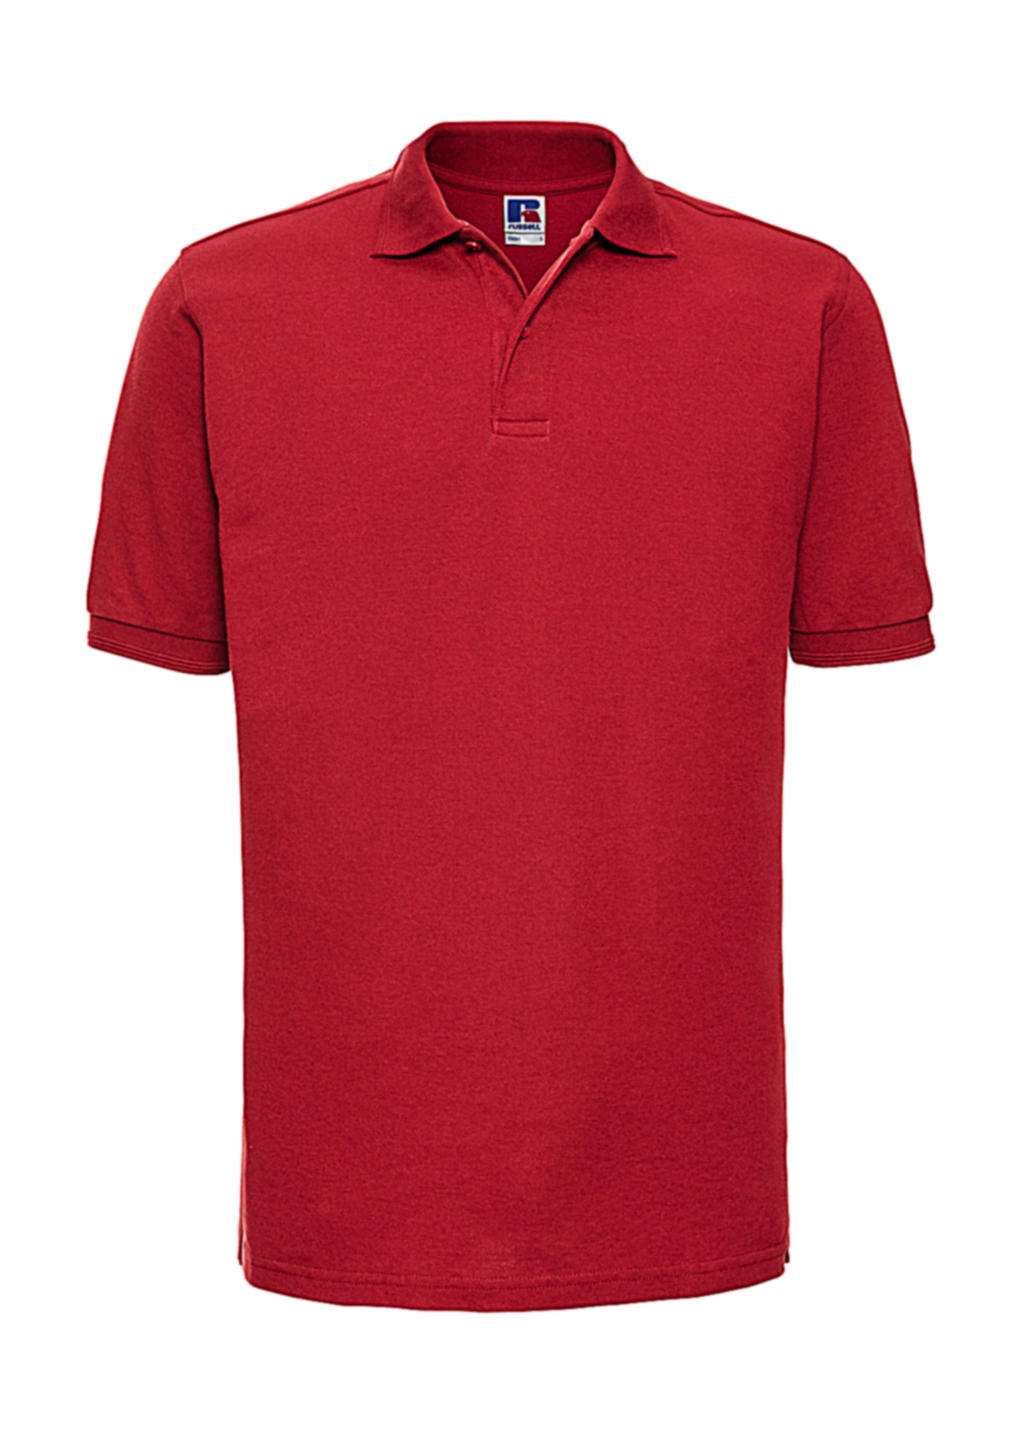  Hardwearing Polo - up to 4XL in Farbe Bright Red